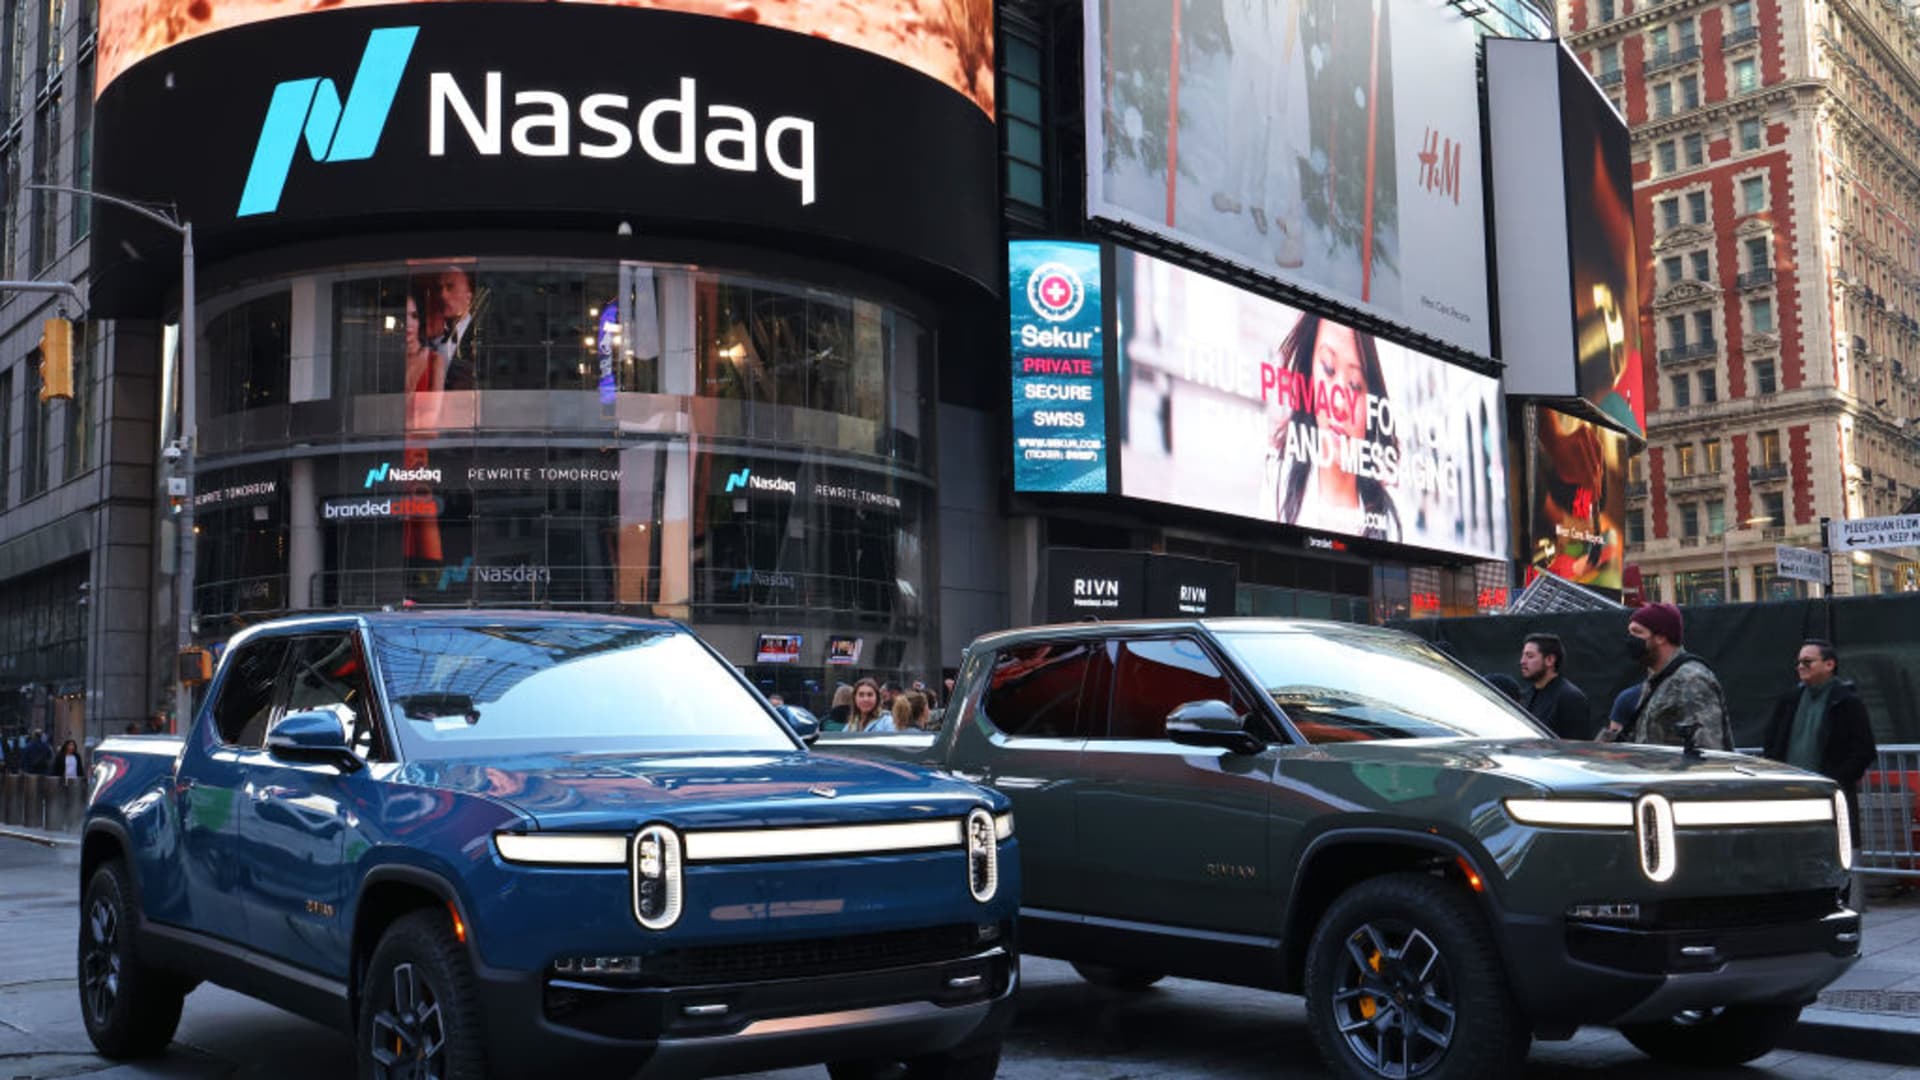 Rivian electric trucks are seen parked near the Nasdaq MarketSite building in Times Square on November 10, 2021 in New York City.